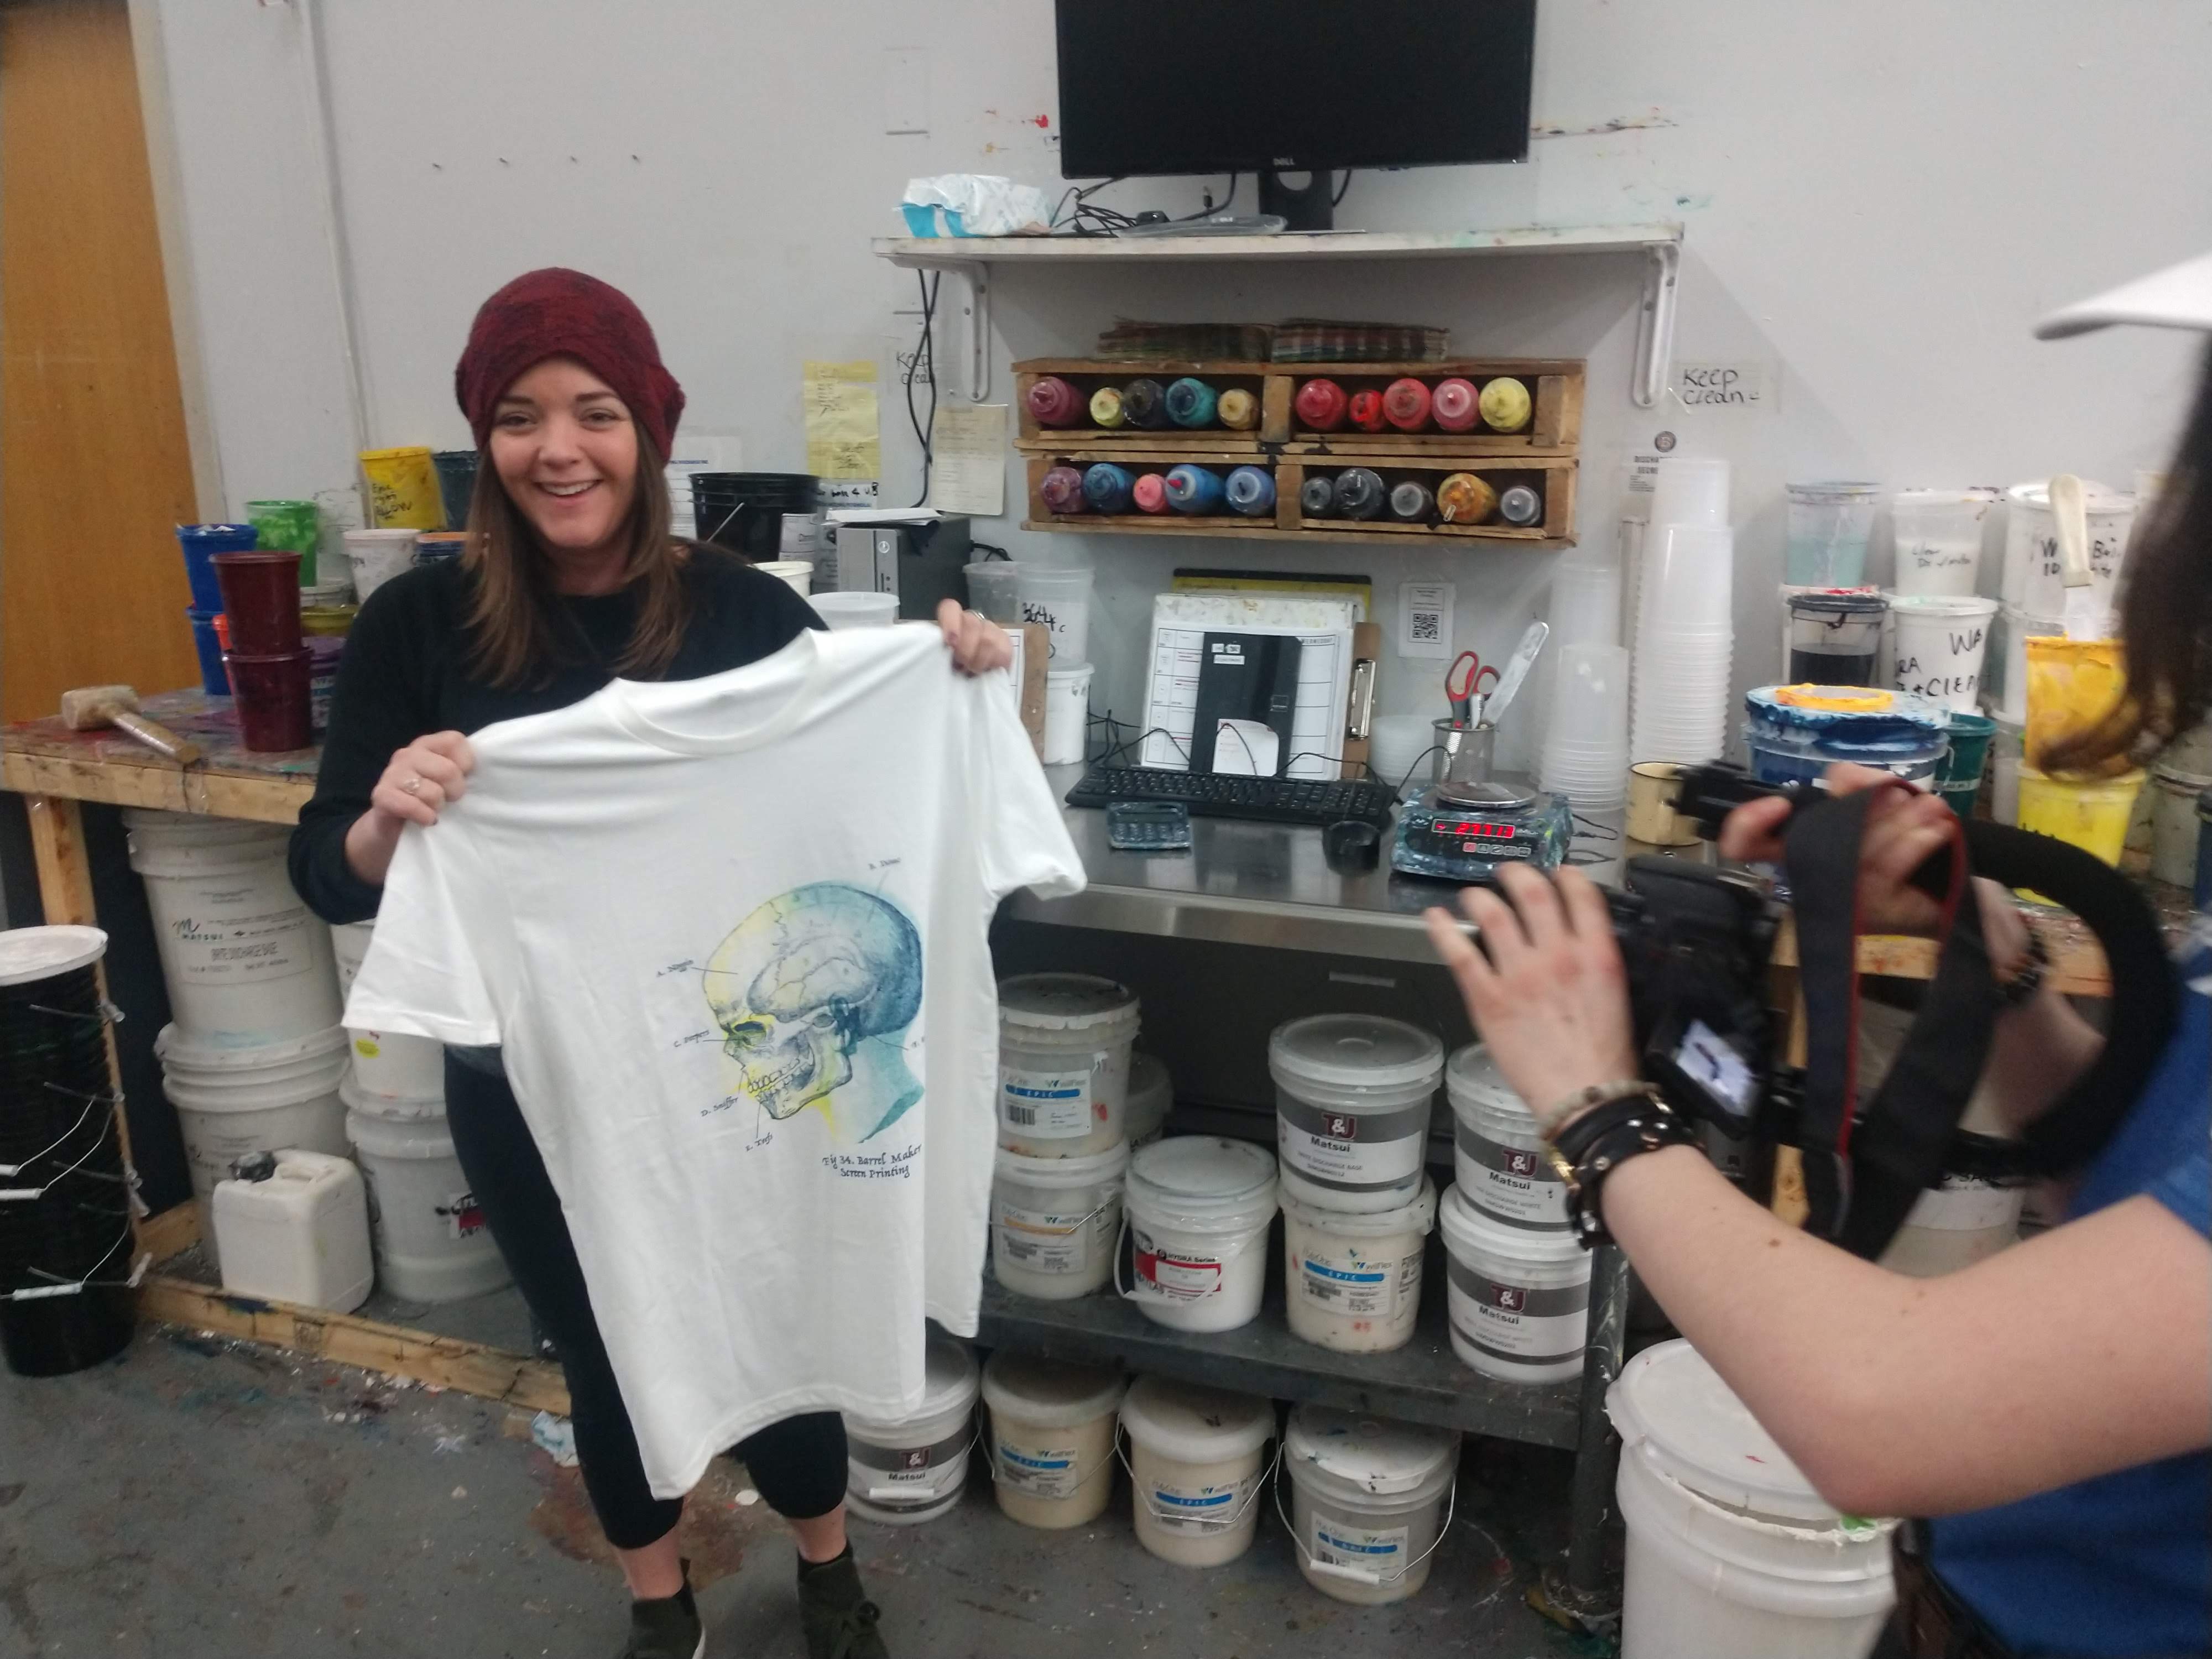 Laura Ezell, customer success at Printavo, showing off her first screen printed shirt